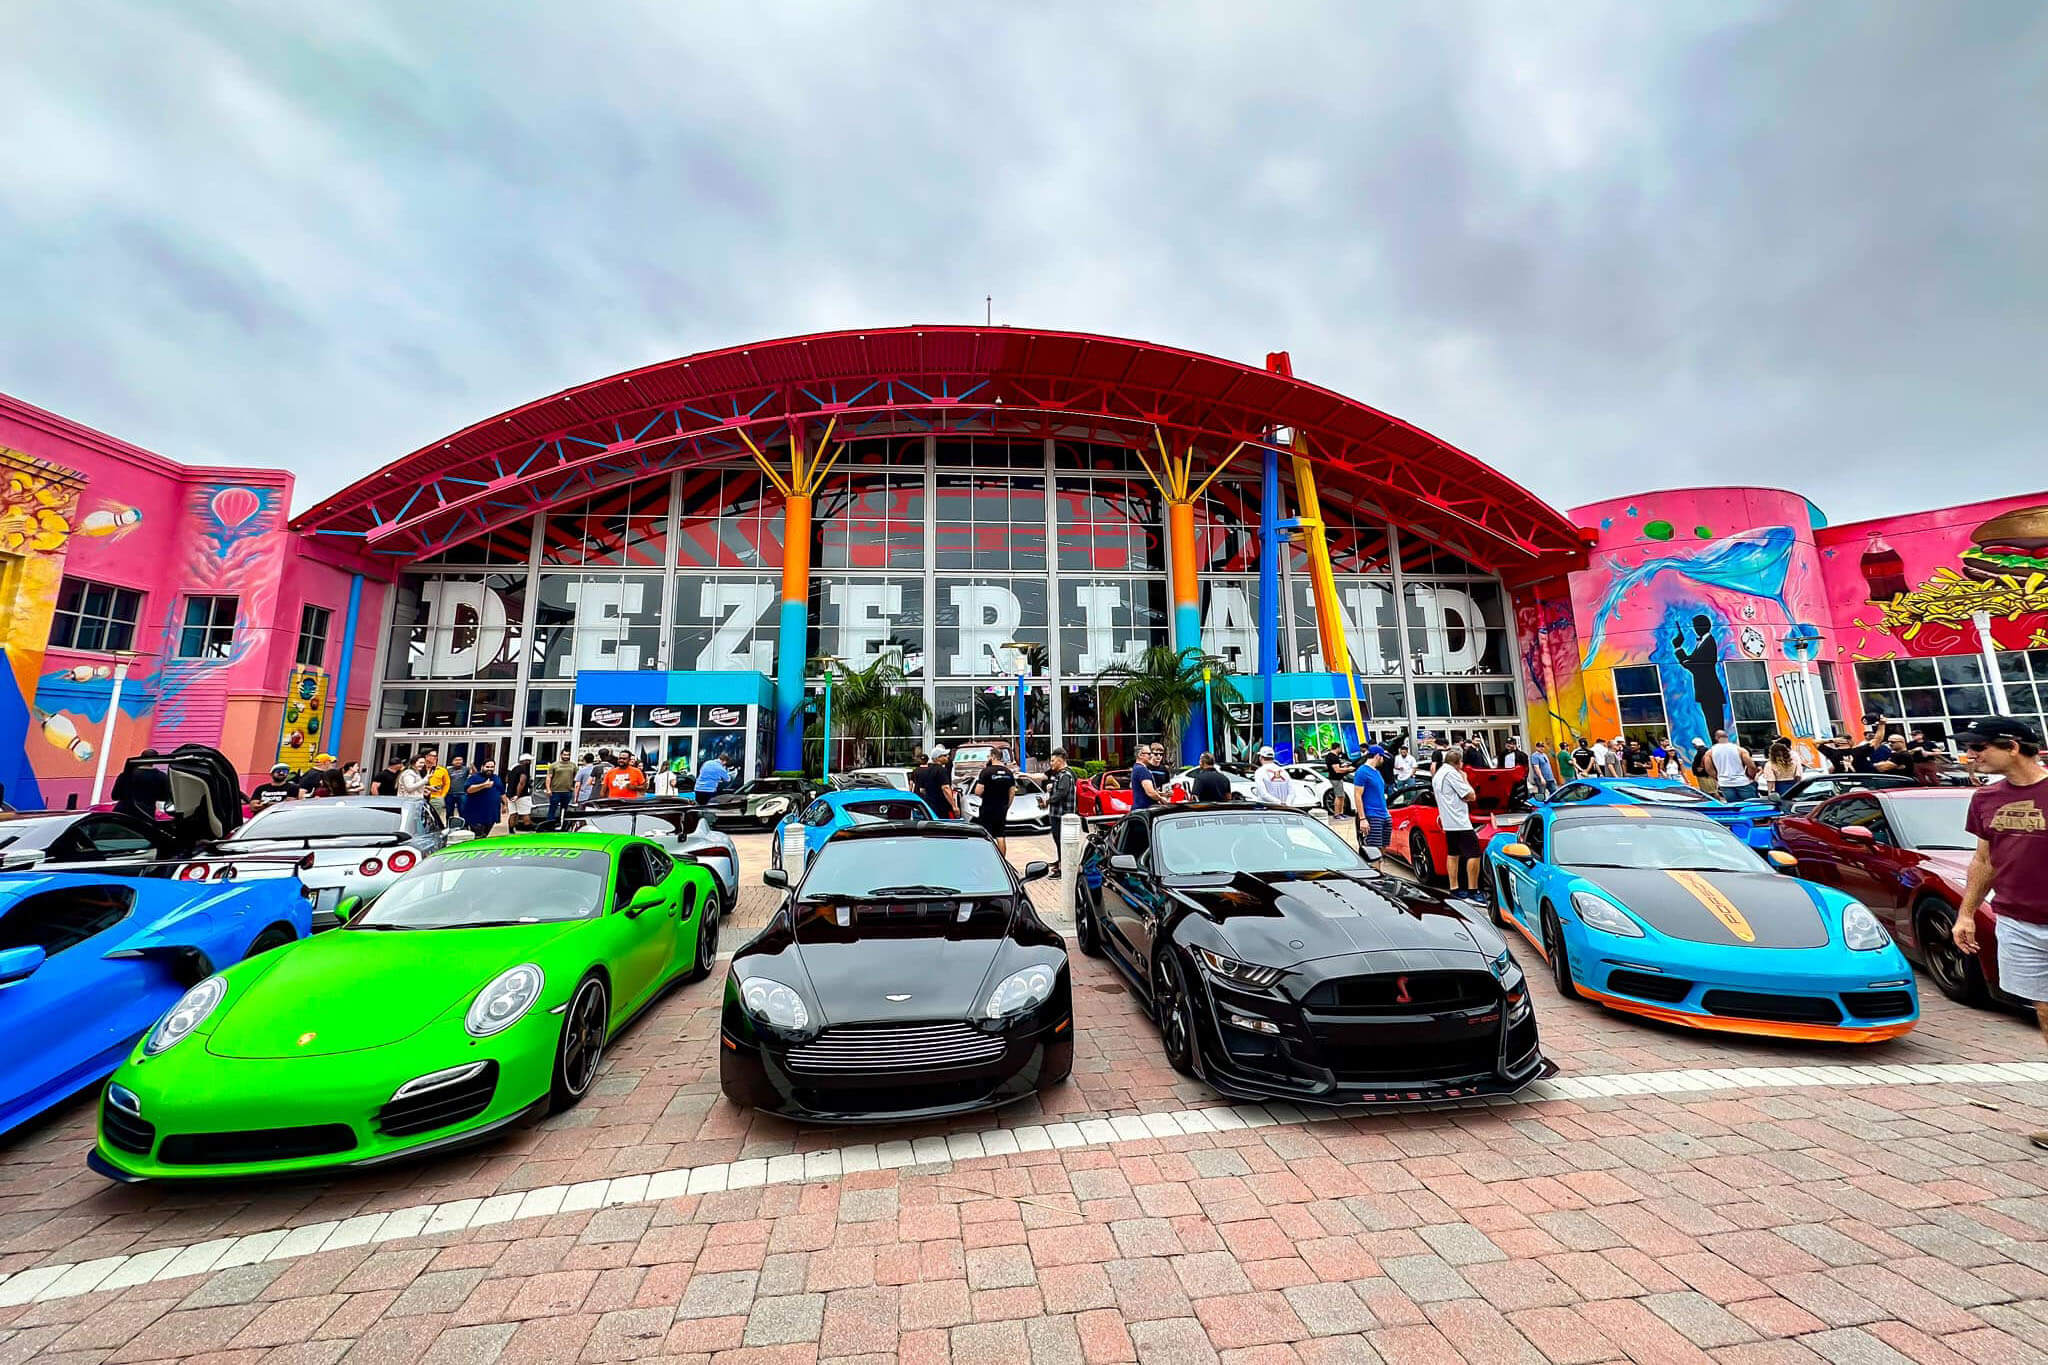 Cars parked in front of Dezerland 